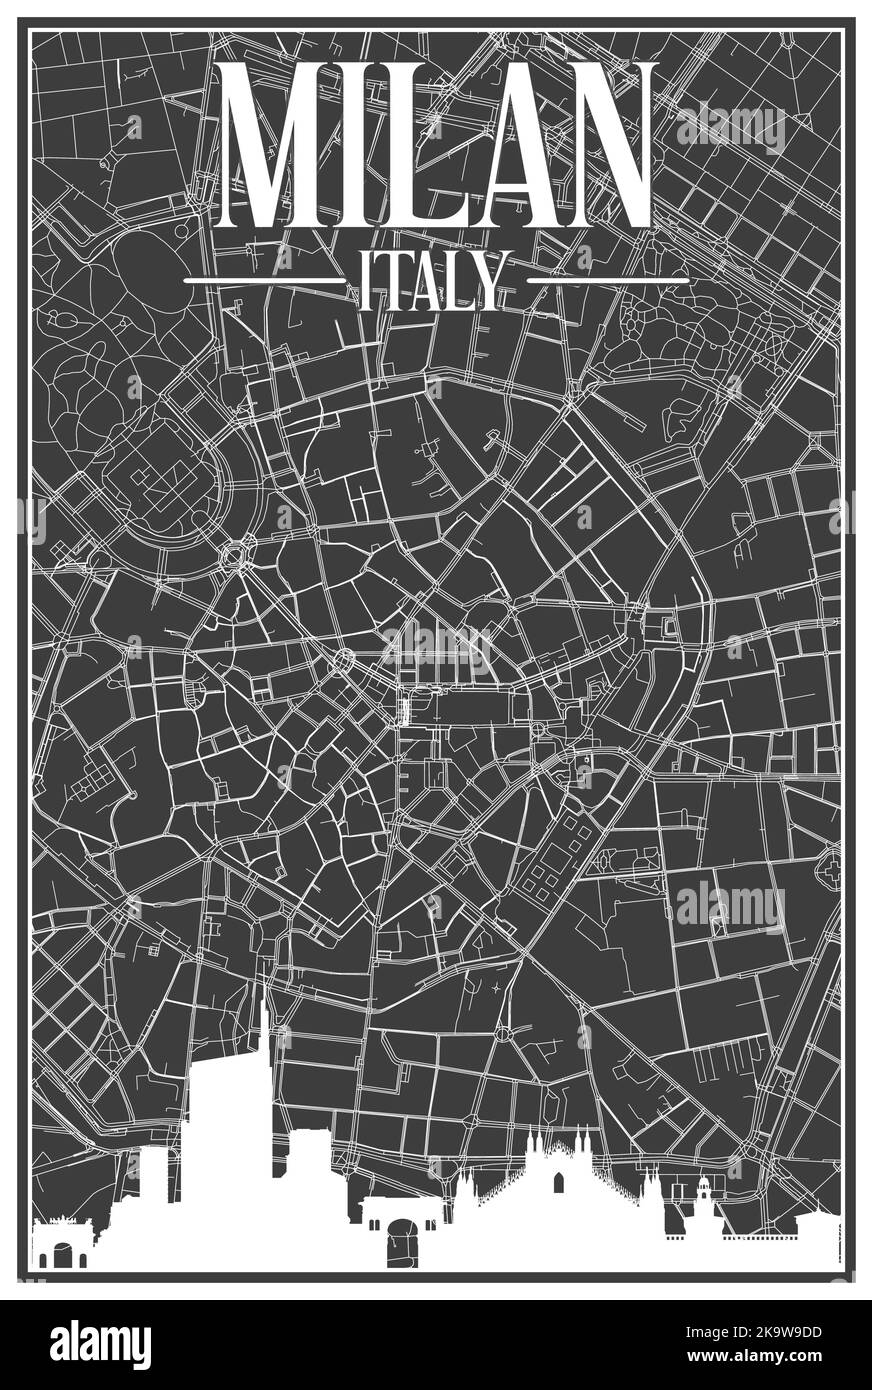 Hand-drawn downtown streets network printout map of MILAN, ITALY Stock Vector